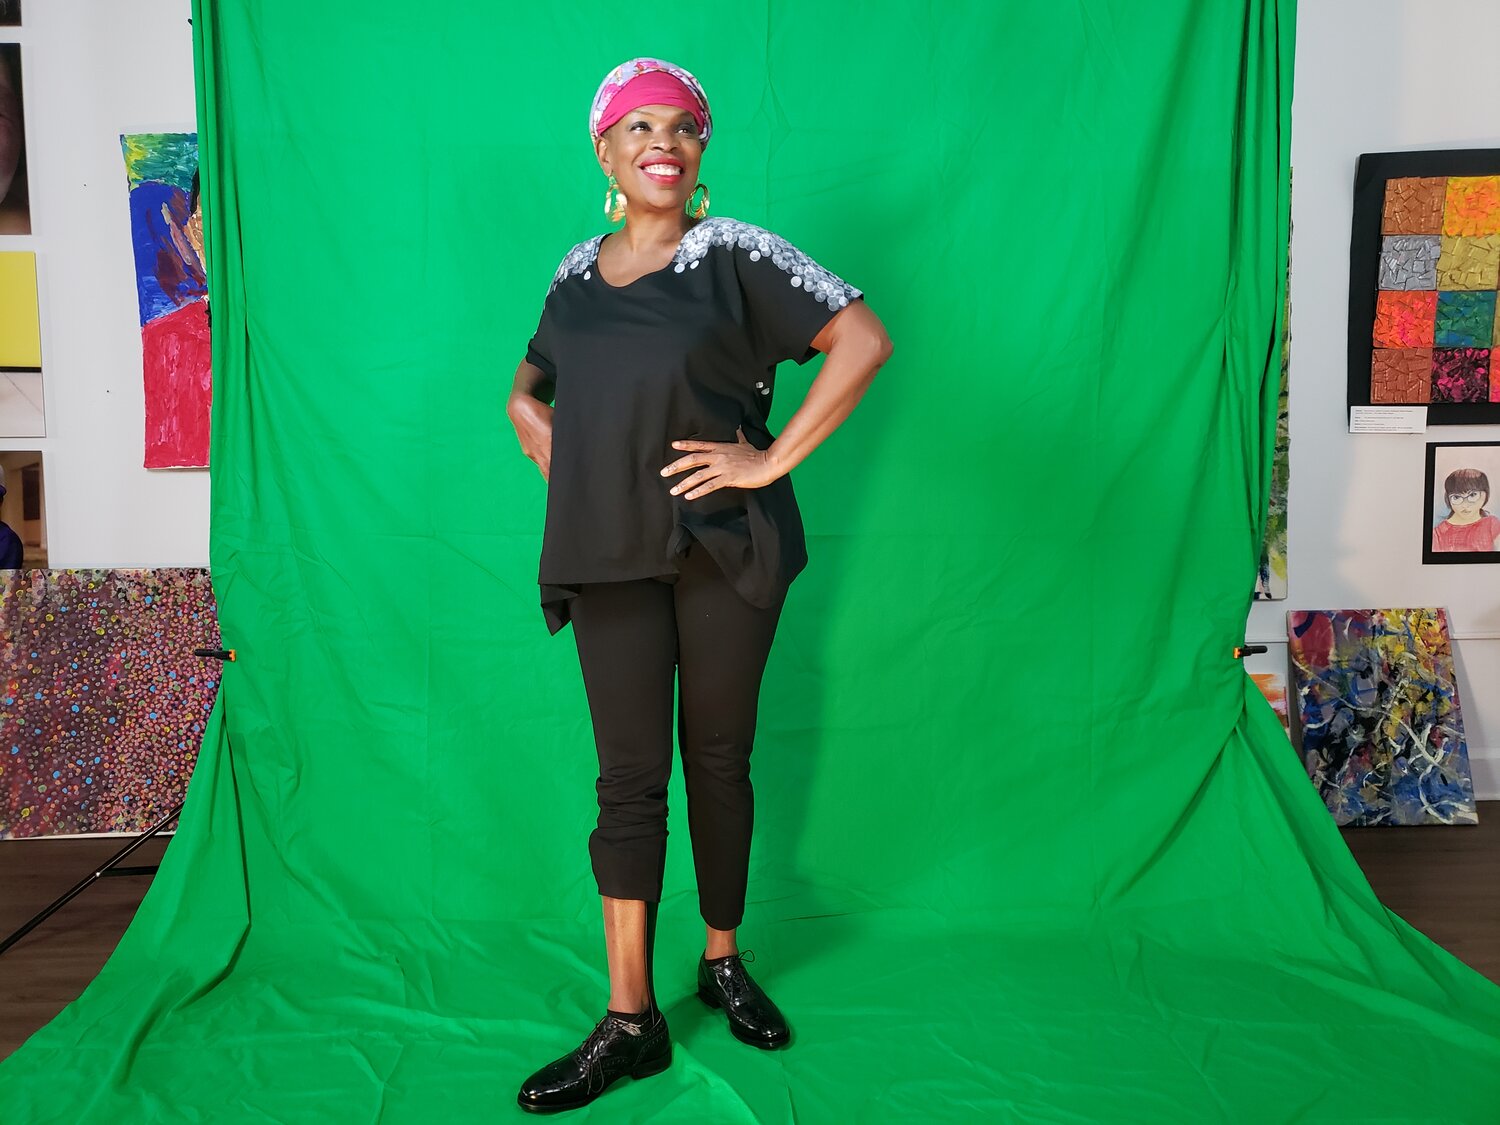 Zazel is standing smiling in front of the green screen at the Positive Exposure location in NYC. She is wearing a black t-shirt with white hand painted shoulders, black pants, black shiny shoes and of course, her fucsia and flowery milk fiber turban